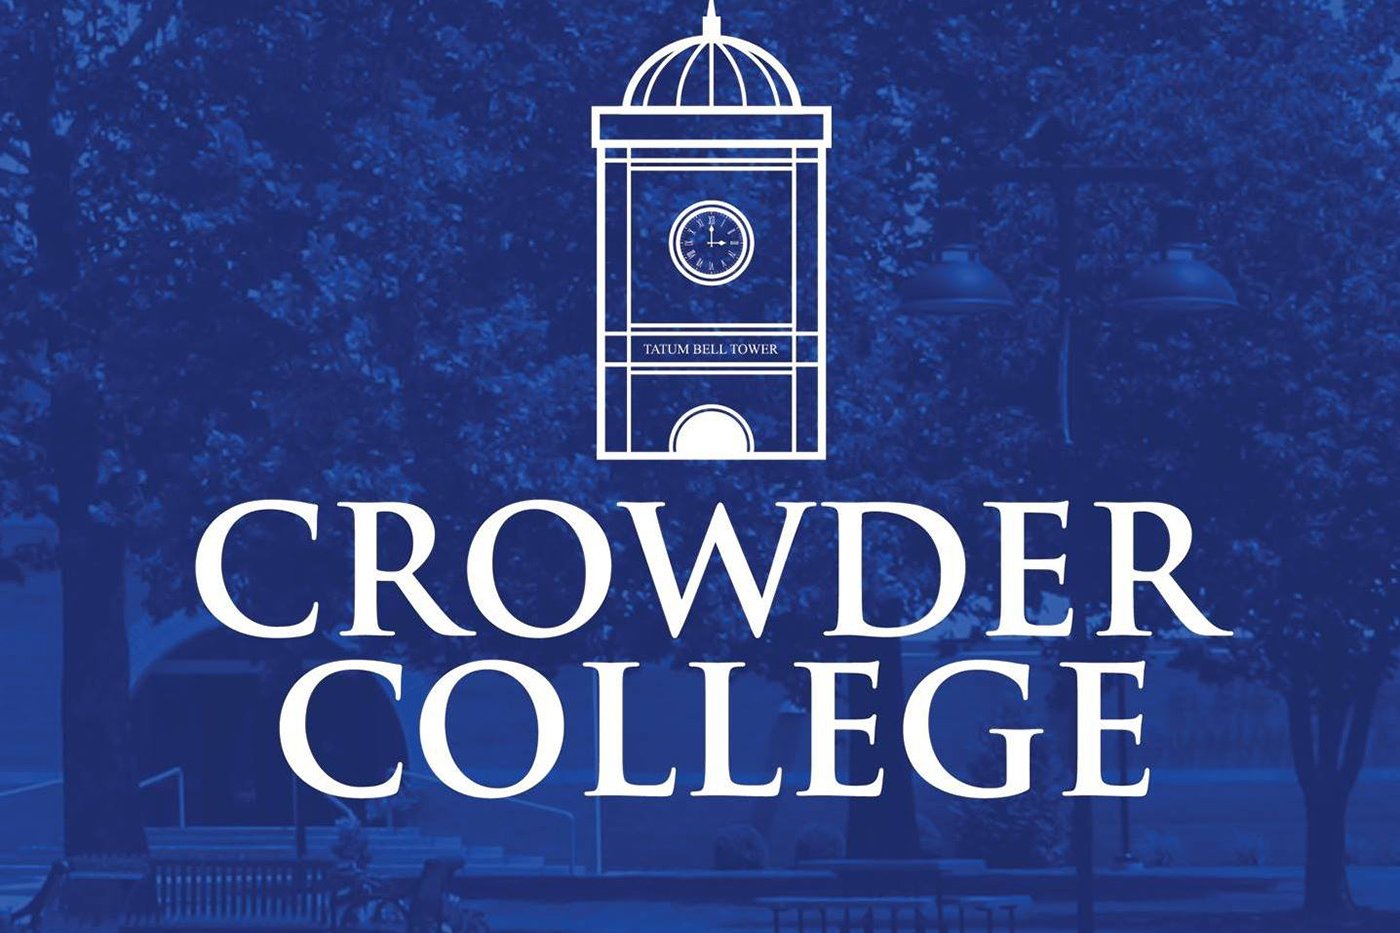 Crowder College logo over a picture of the campus